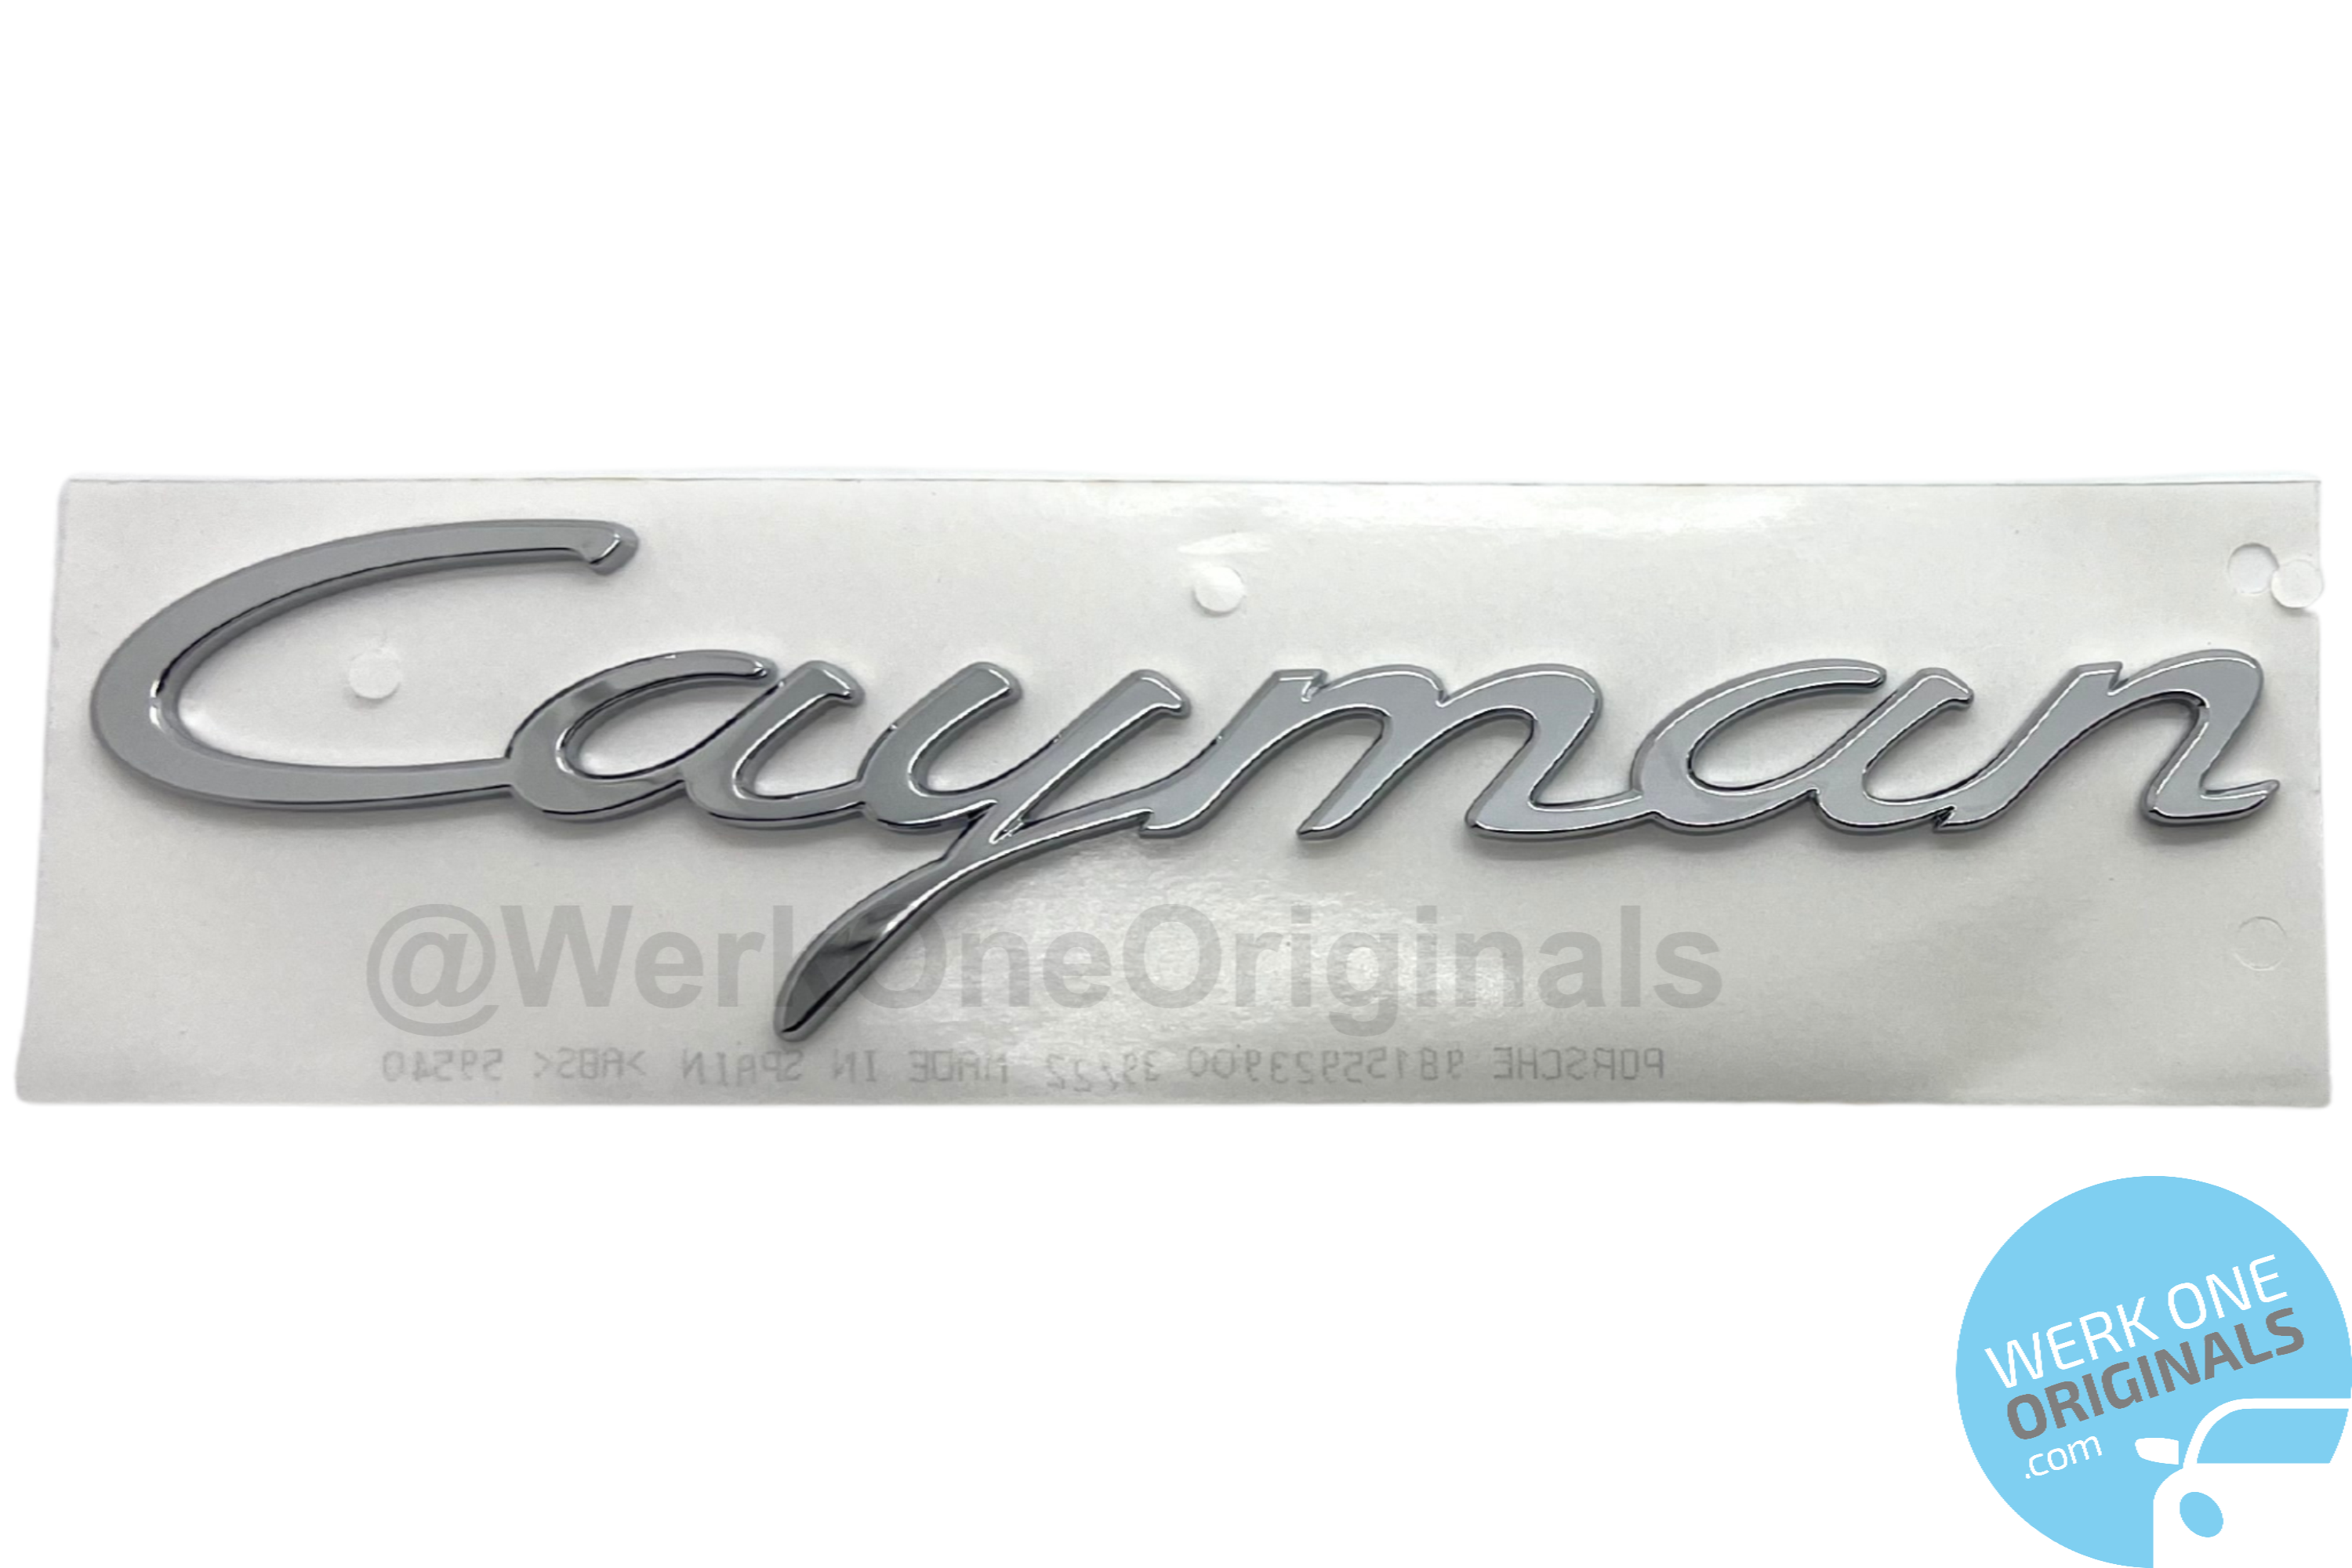 Porsche Official 'Cayman' Rear Badge Decal in Chrome Silver for Cayman Type 718 Models